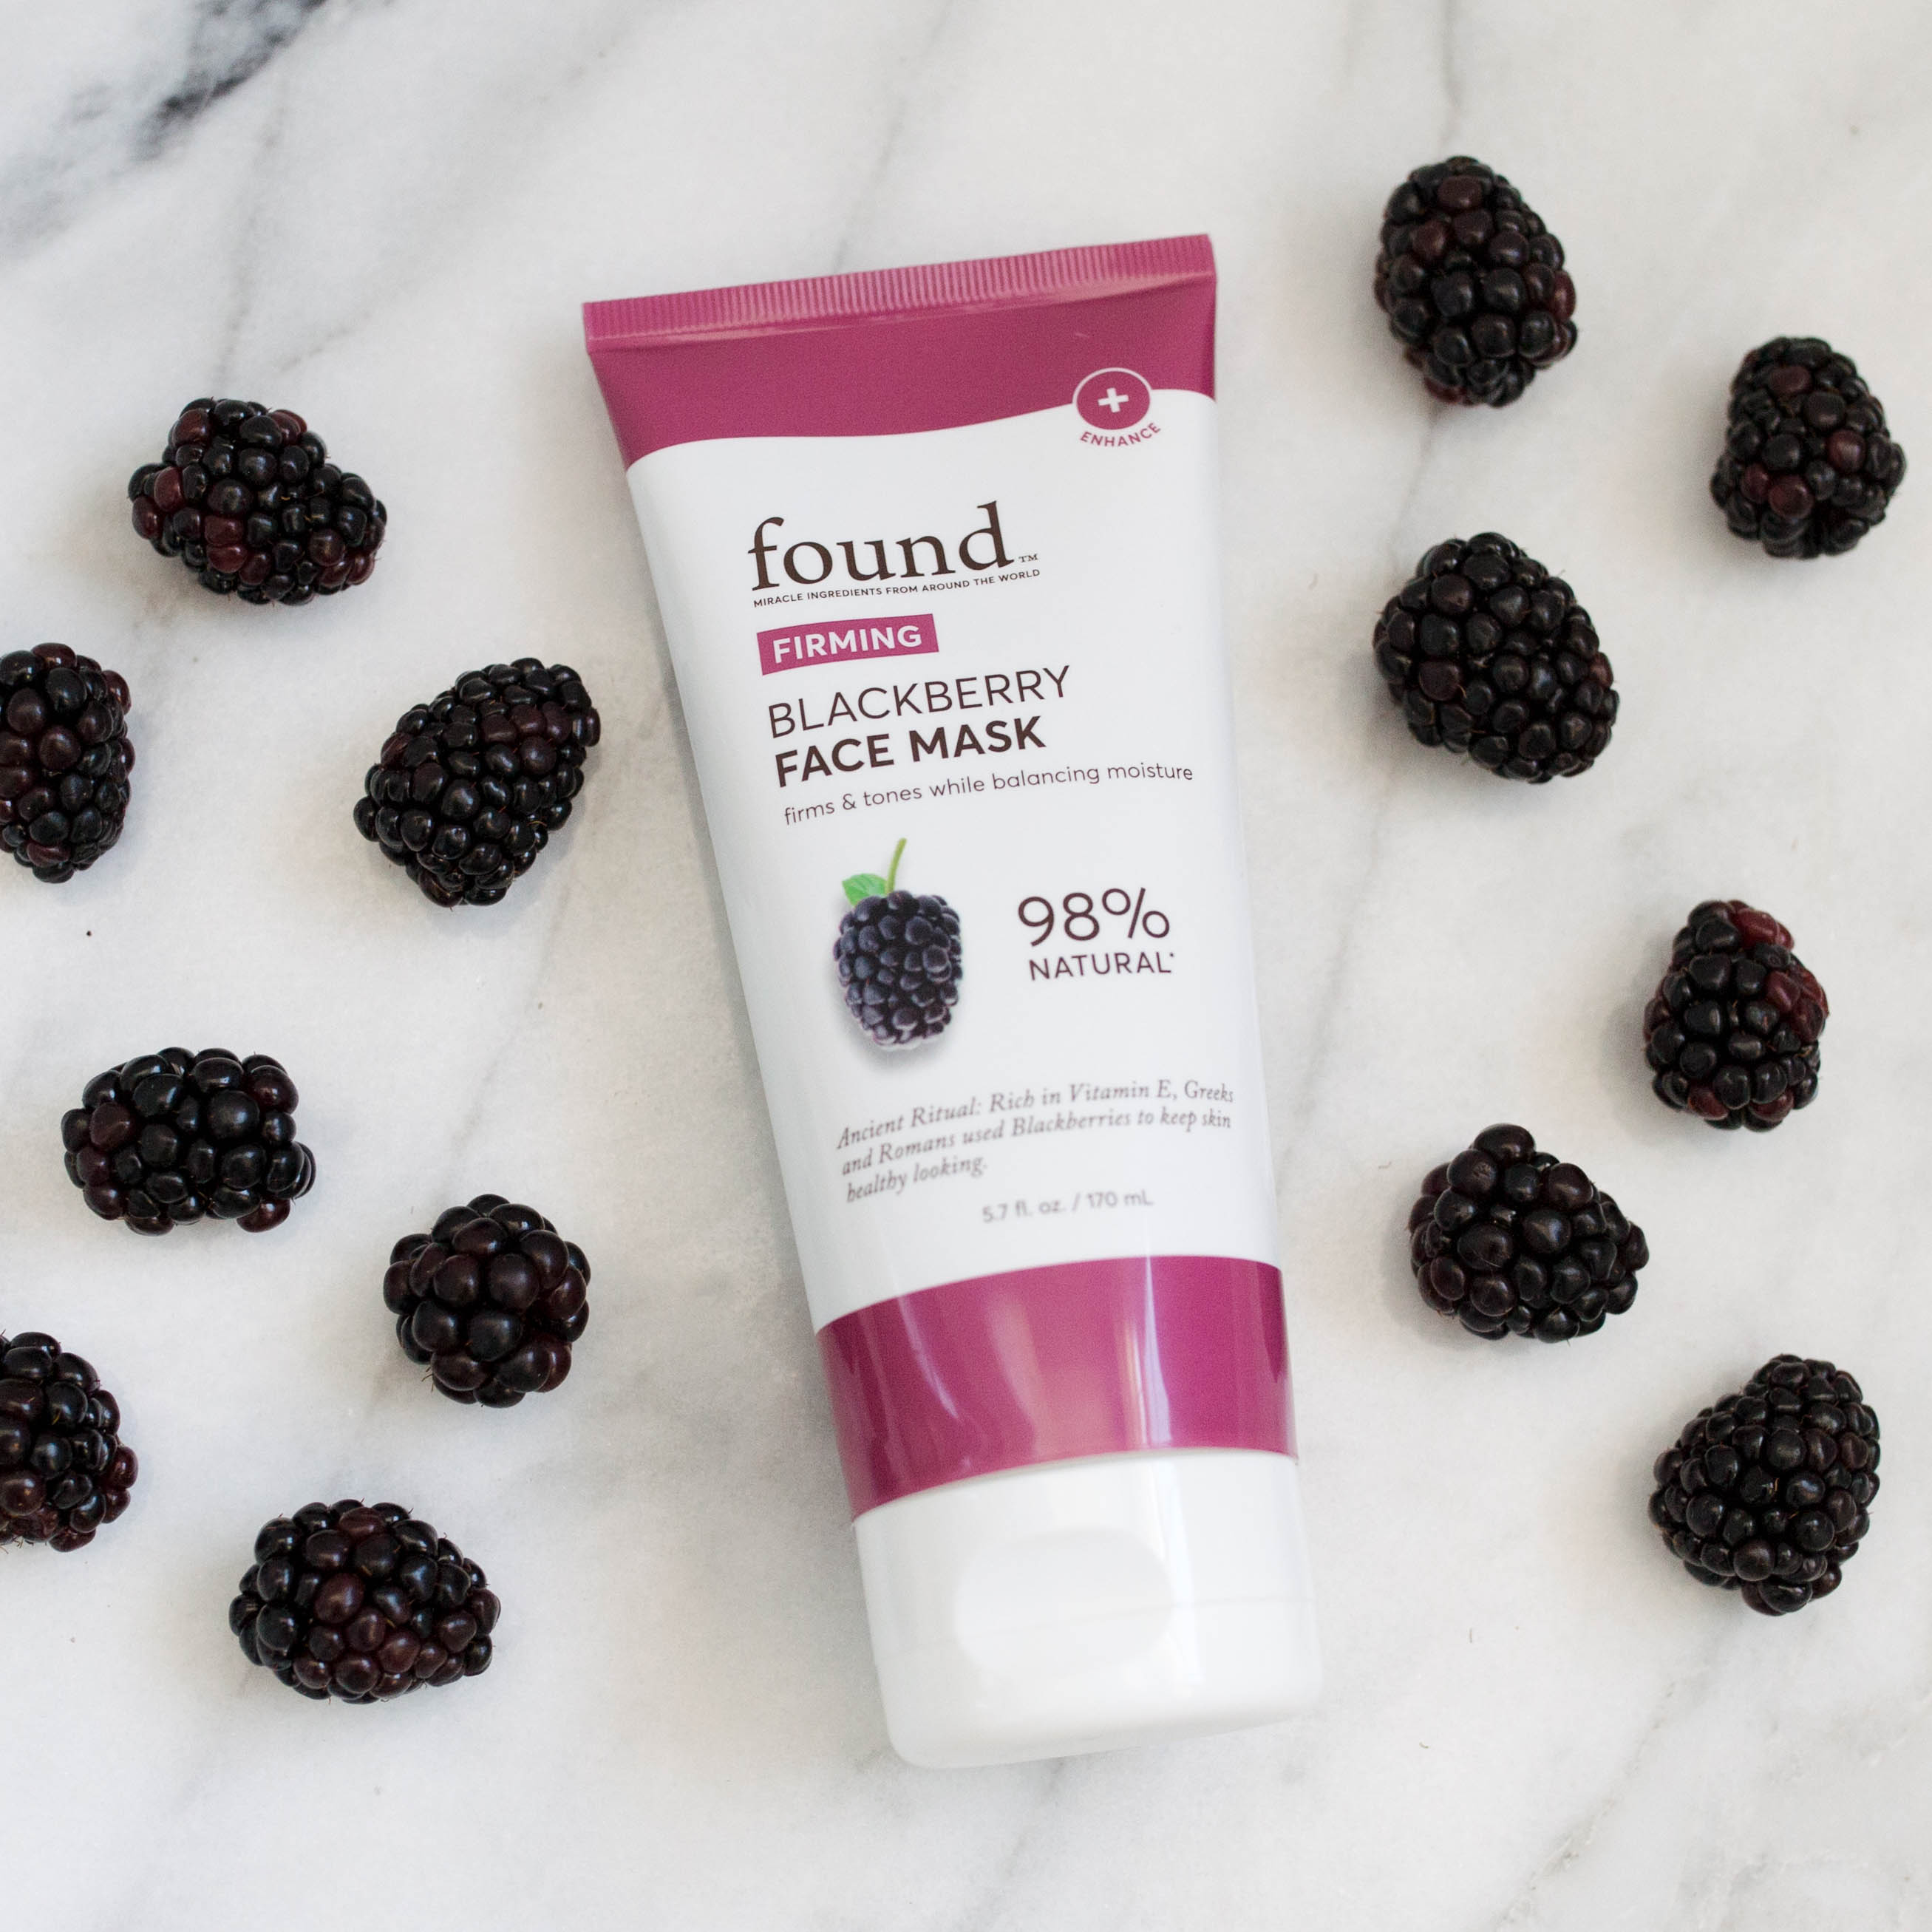 FOUND FIRMING Blackberry Face Mask, 5.7 fl oz - image 4 of 8